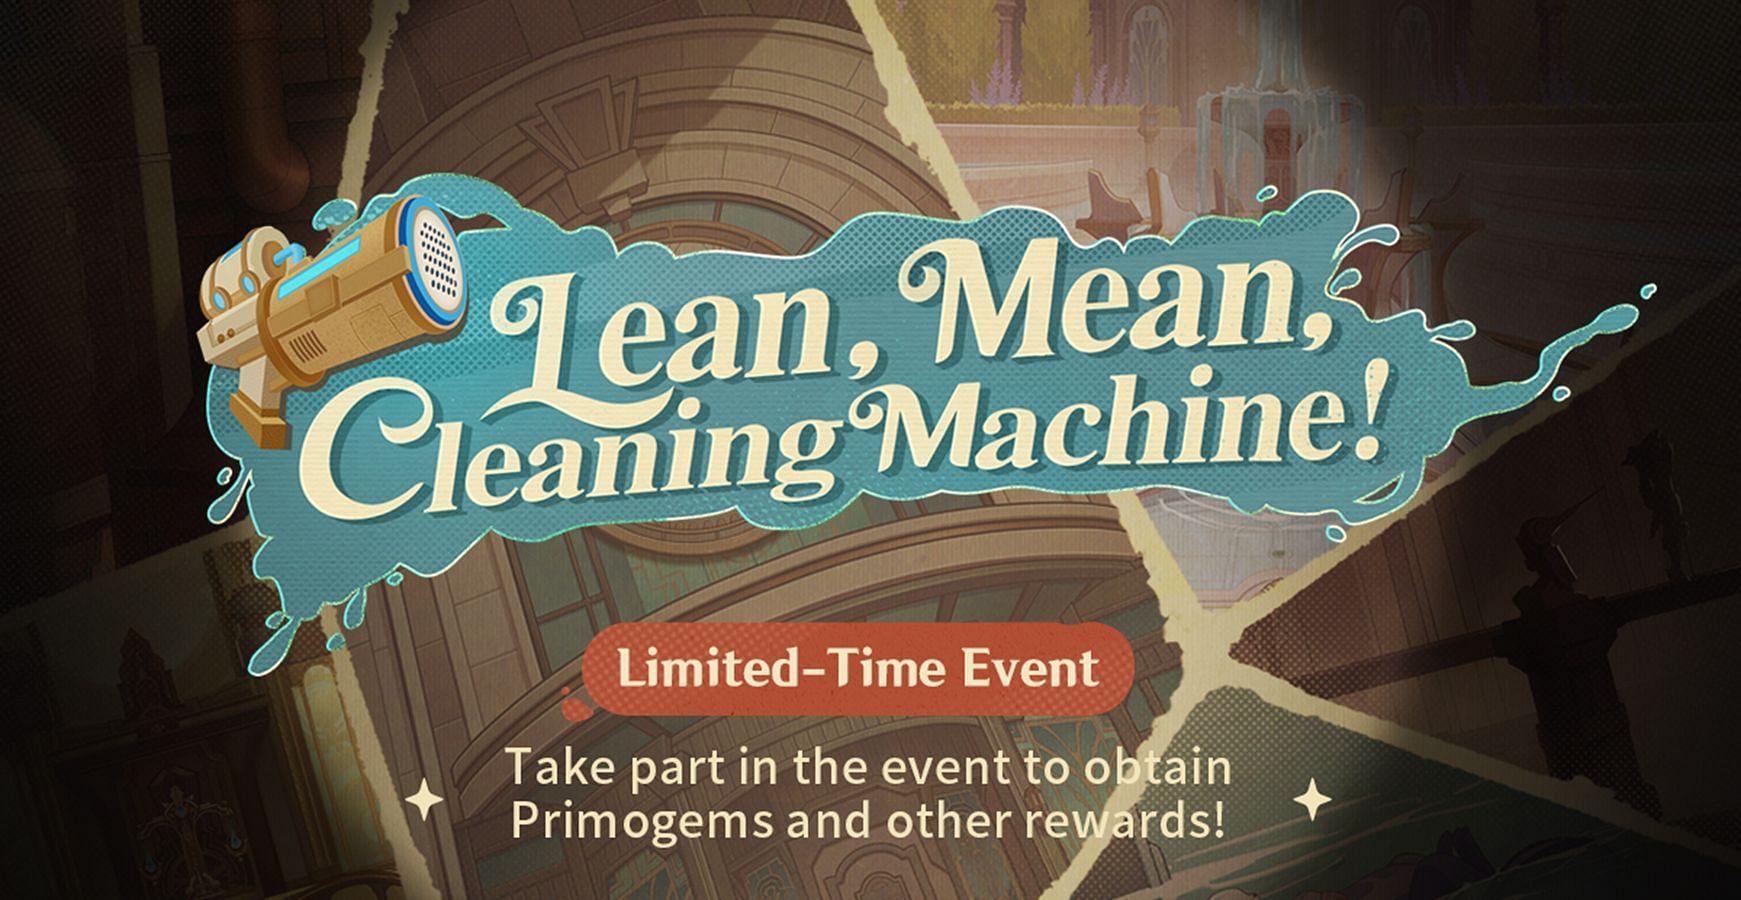 Lean, Mean, Cleaning Machine Web Event Guide (Image via HoYoverse)